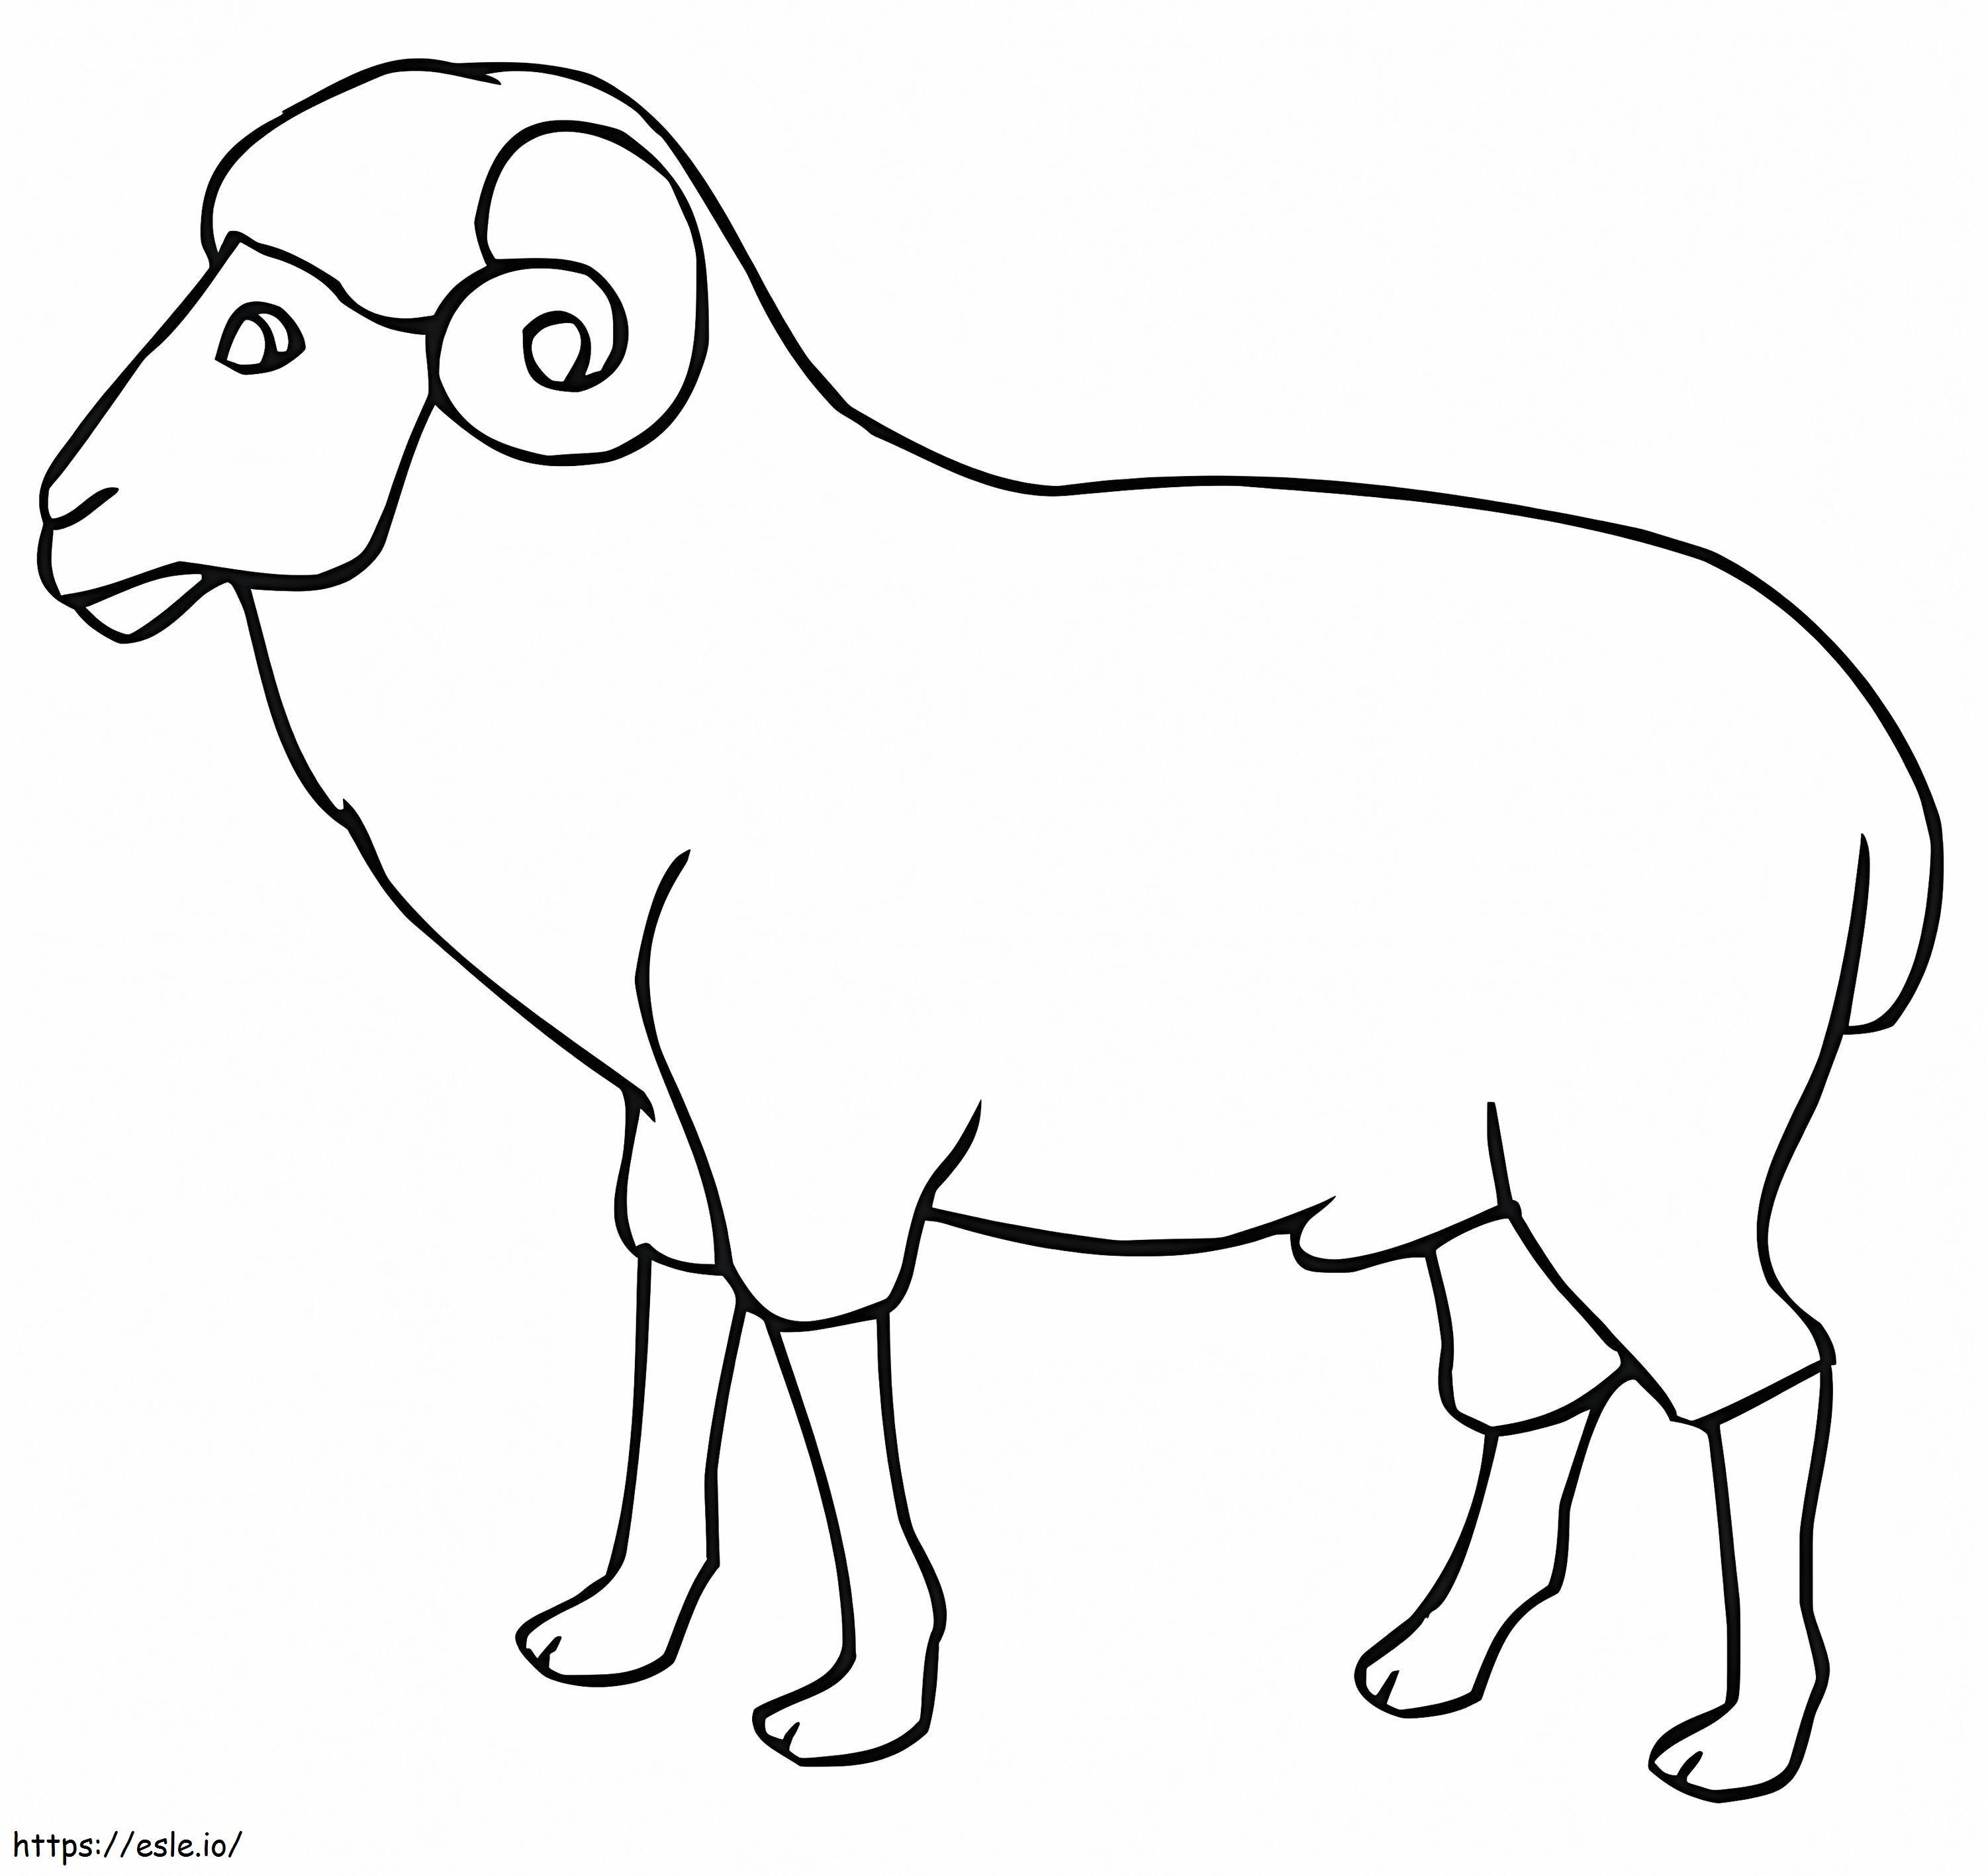 Simple Ram coloring page